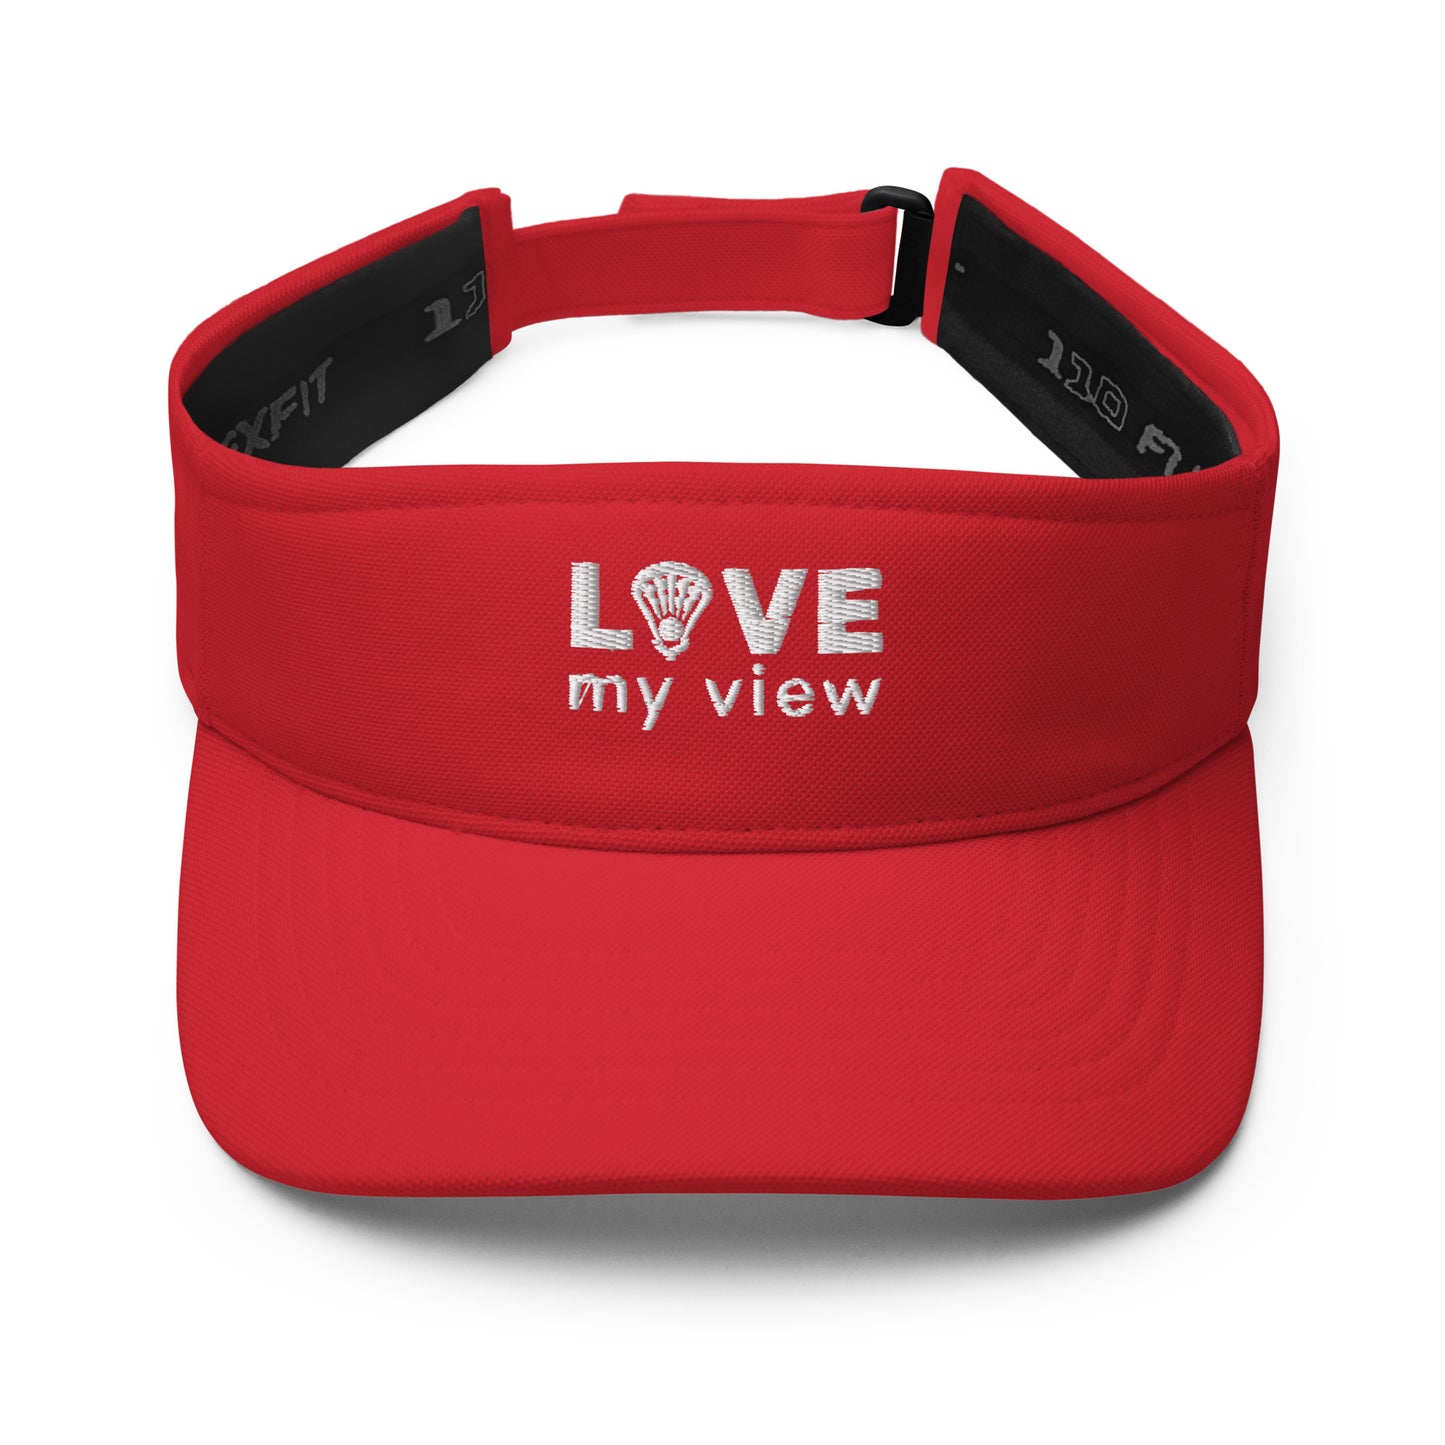 Lacrosse visor (with white embroidery)